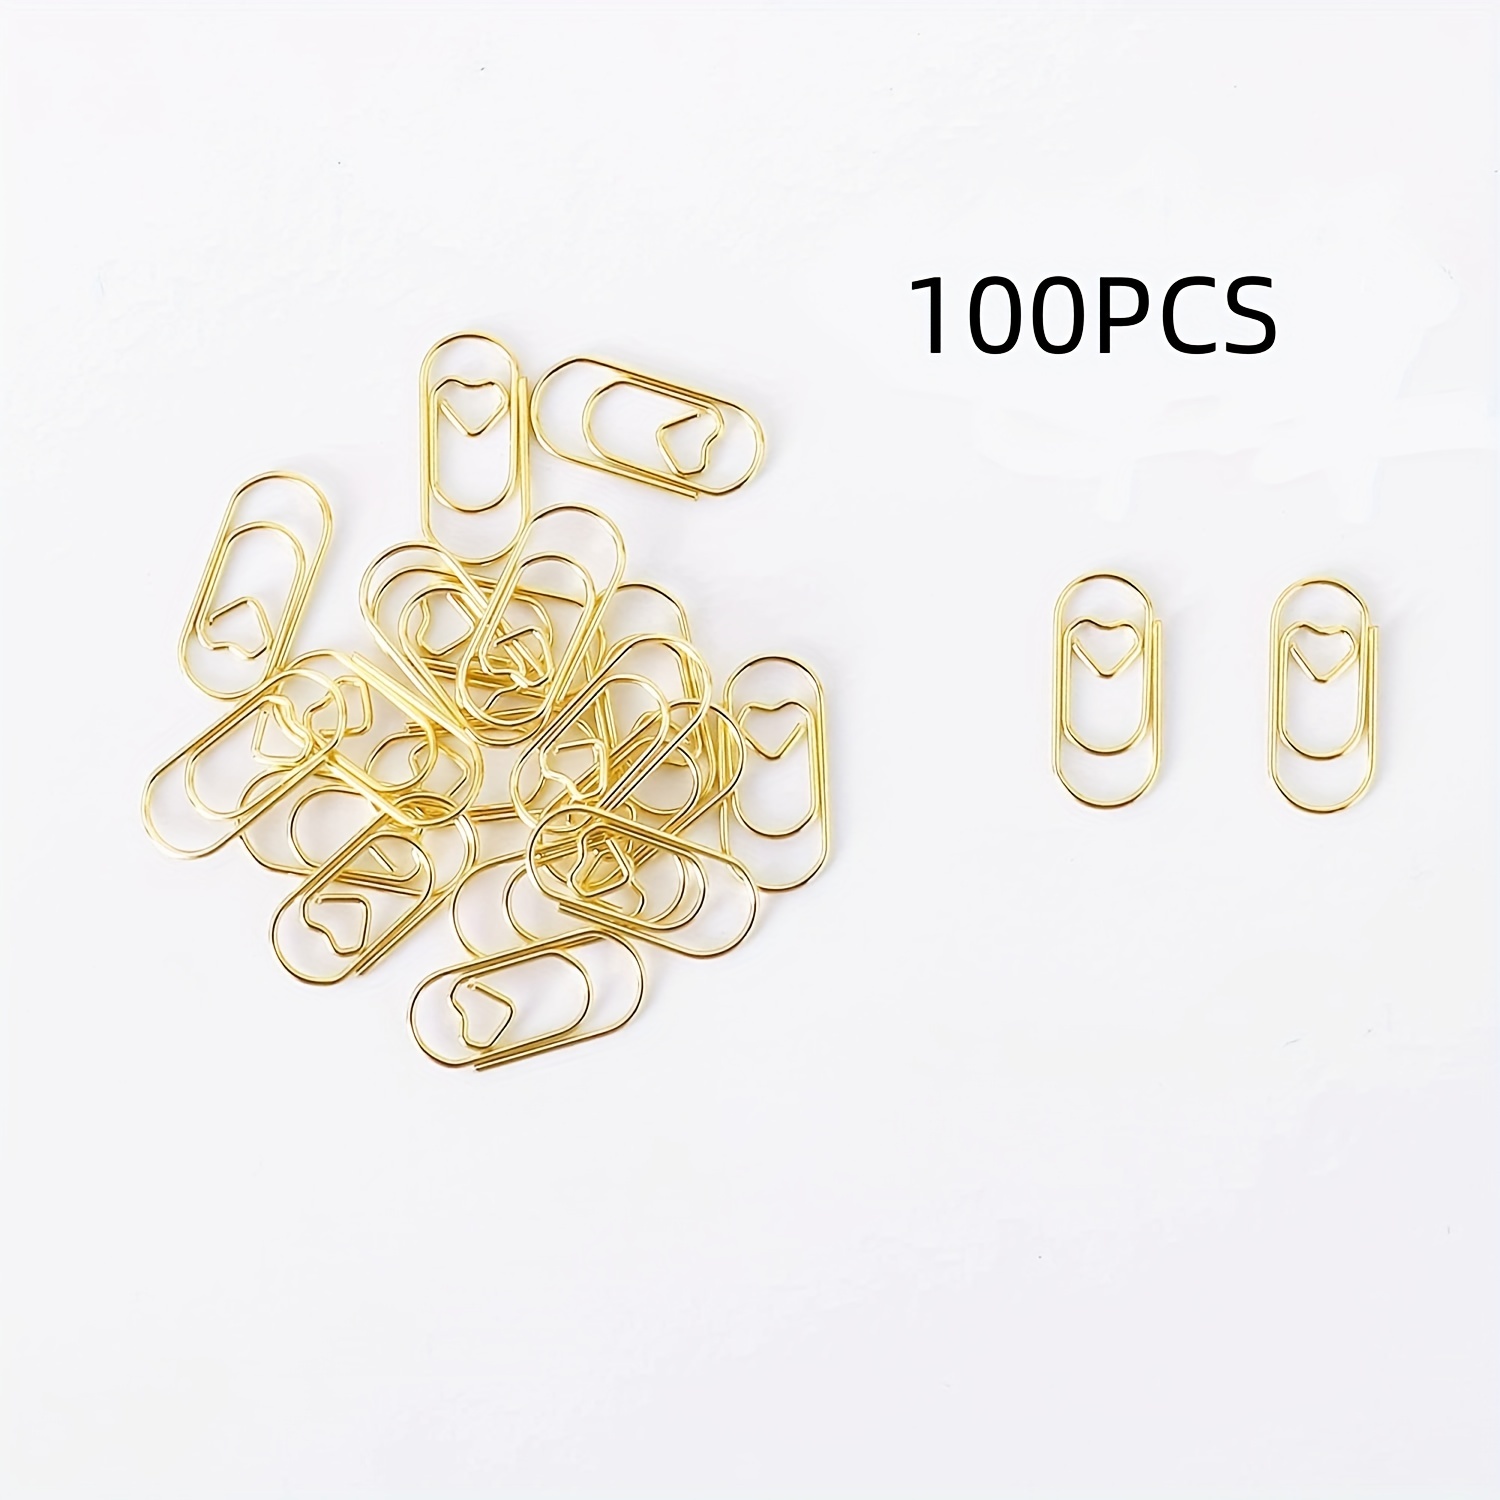 100pcs Heart Shaped Paper Clips Metal Bookmarks Clamps Student